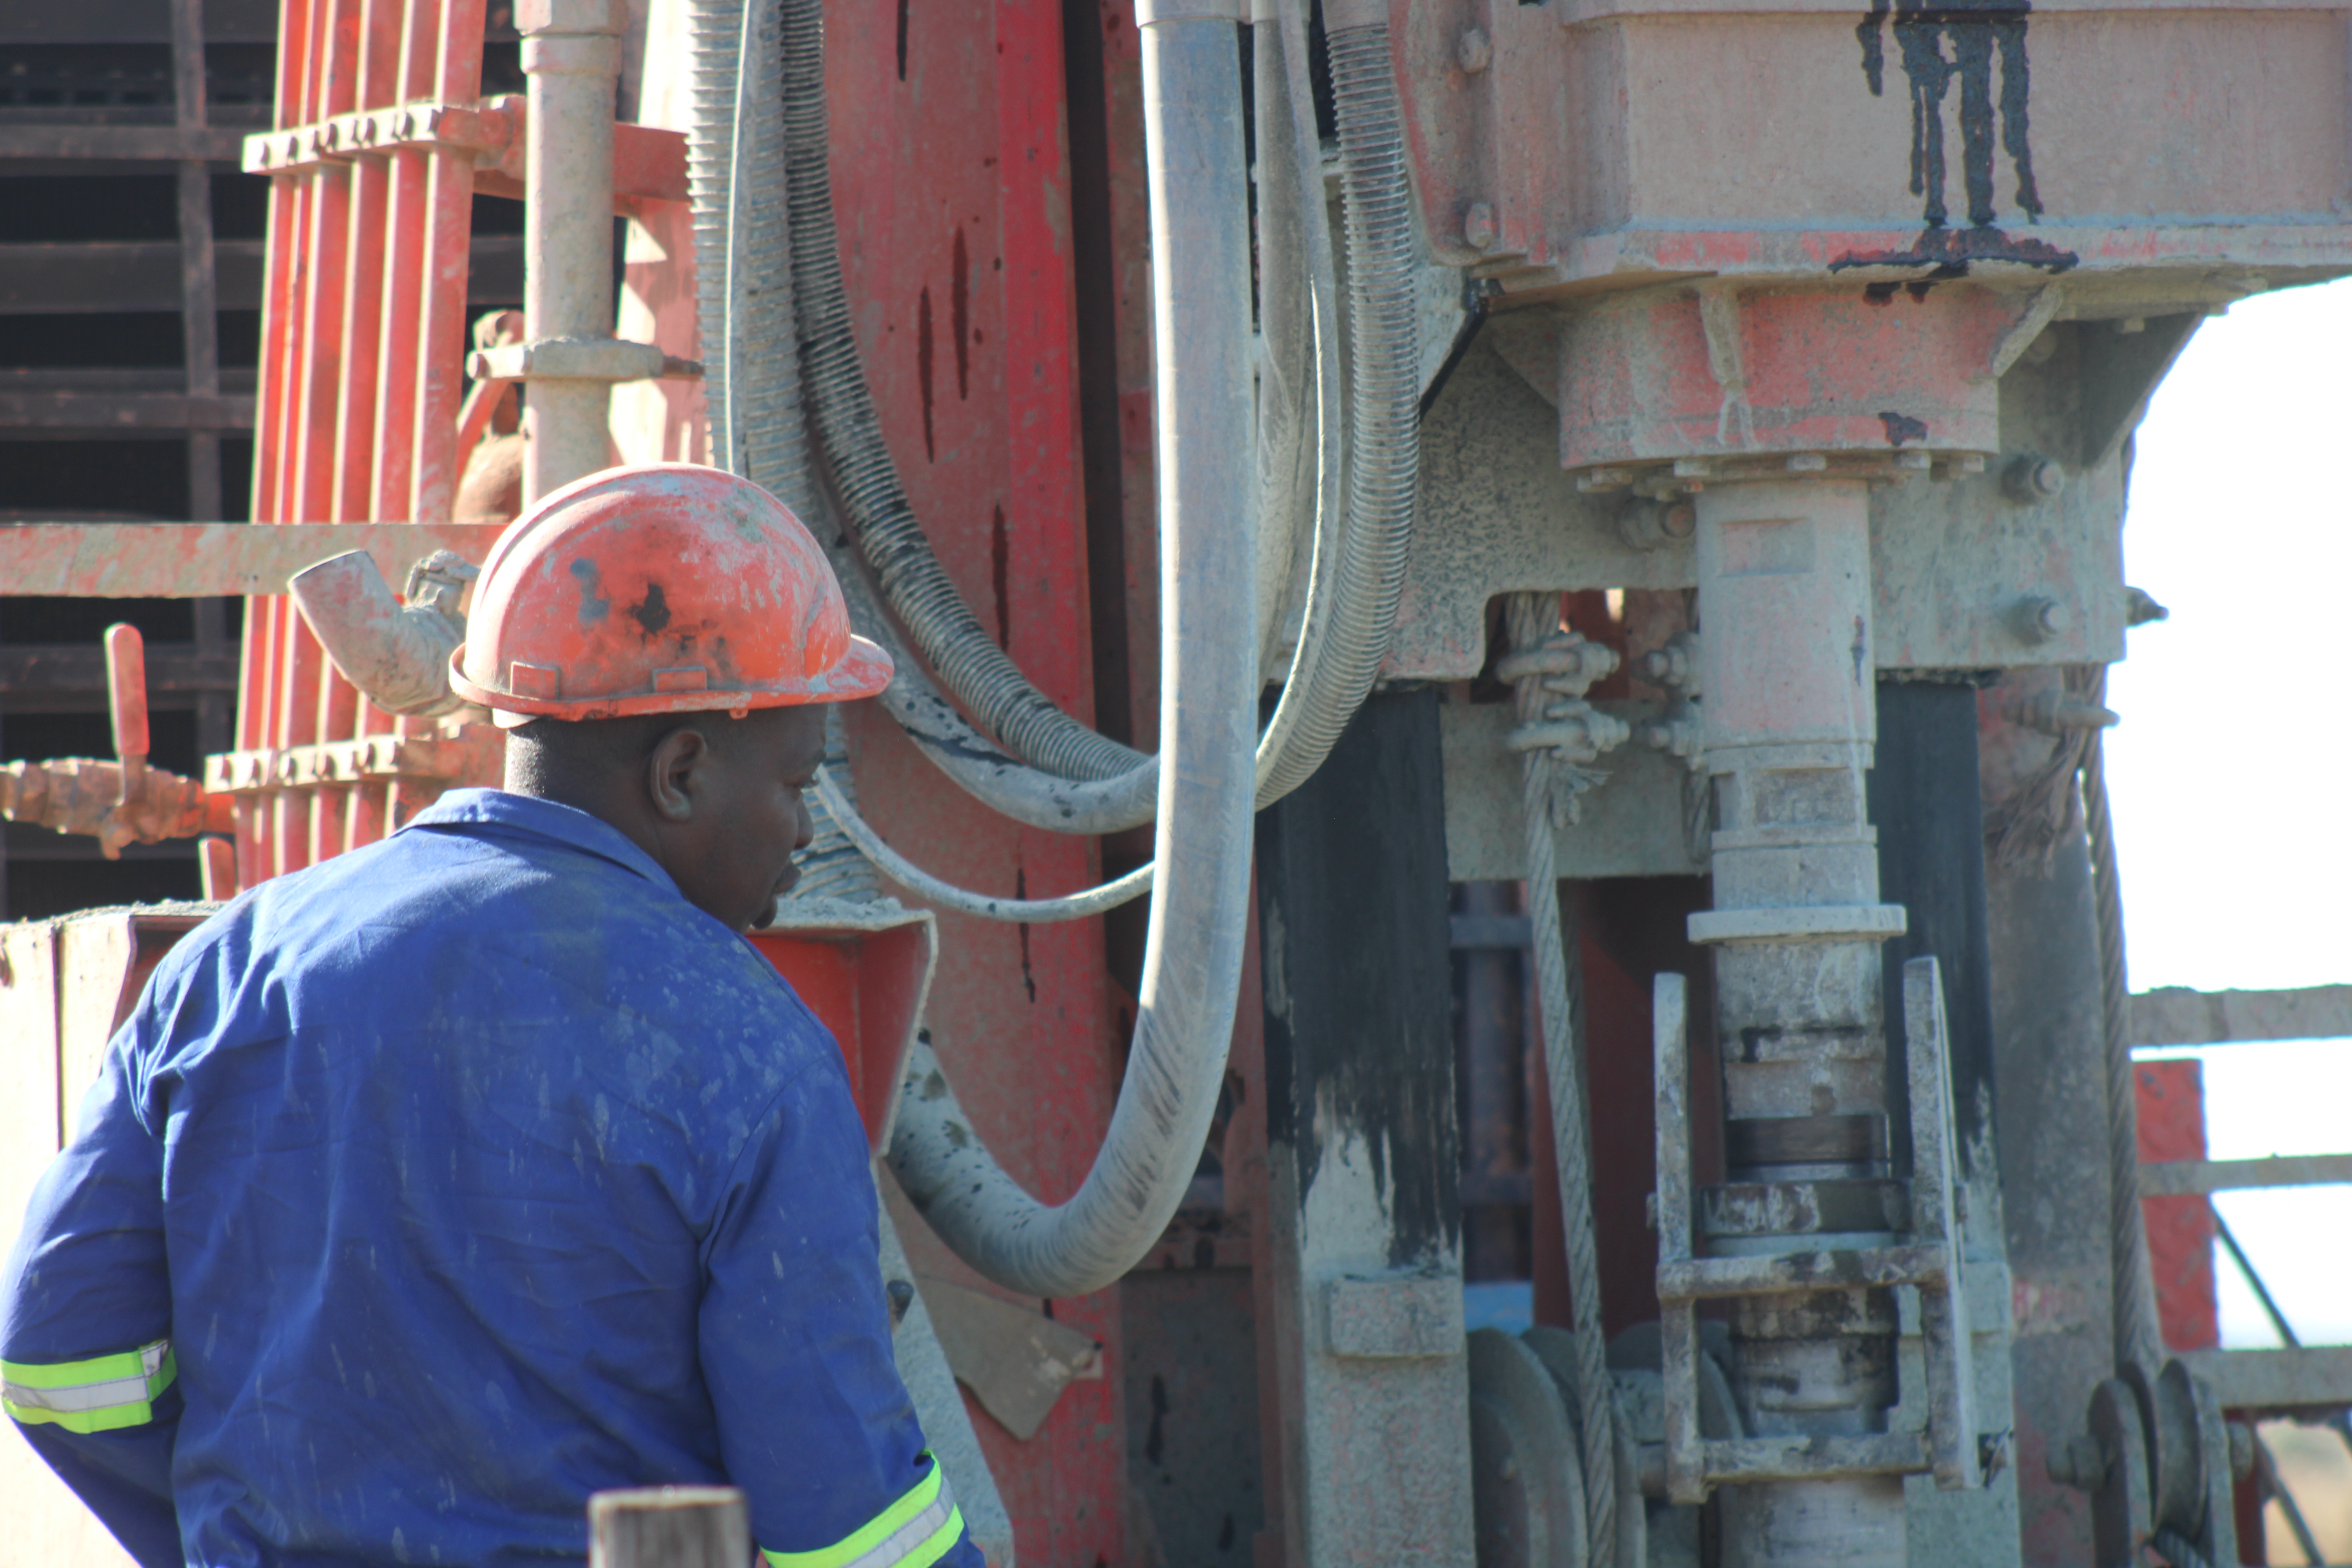 Frequently Asked Questions About Borehole Drilling in Zimbabwe